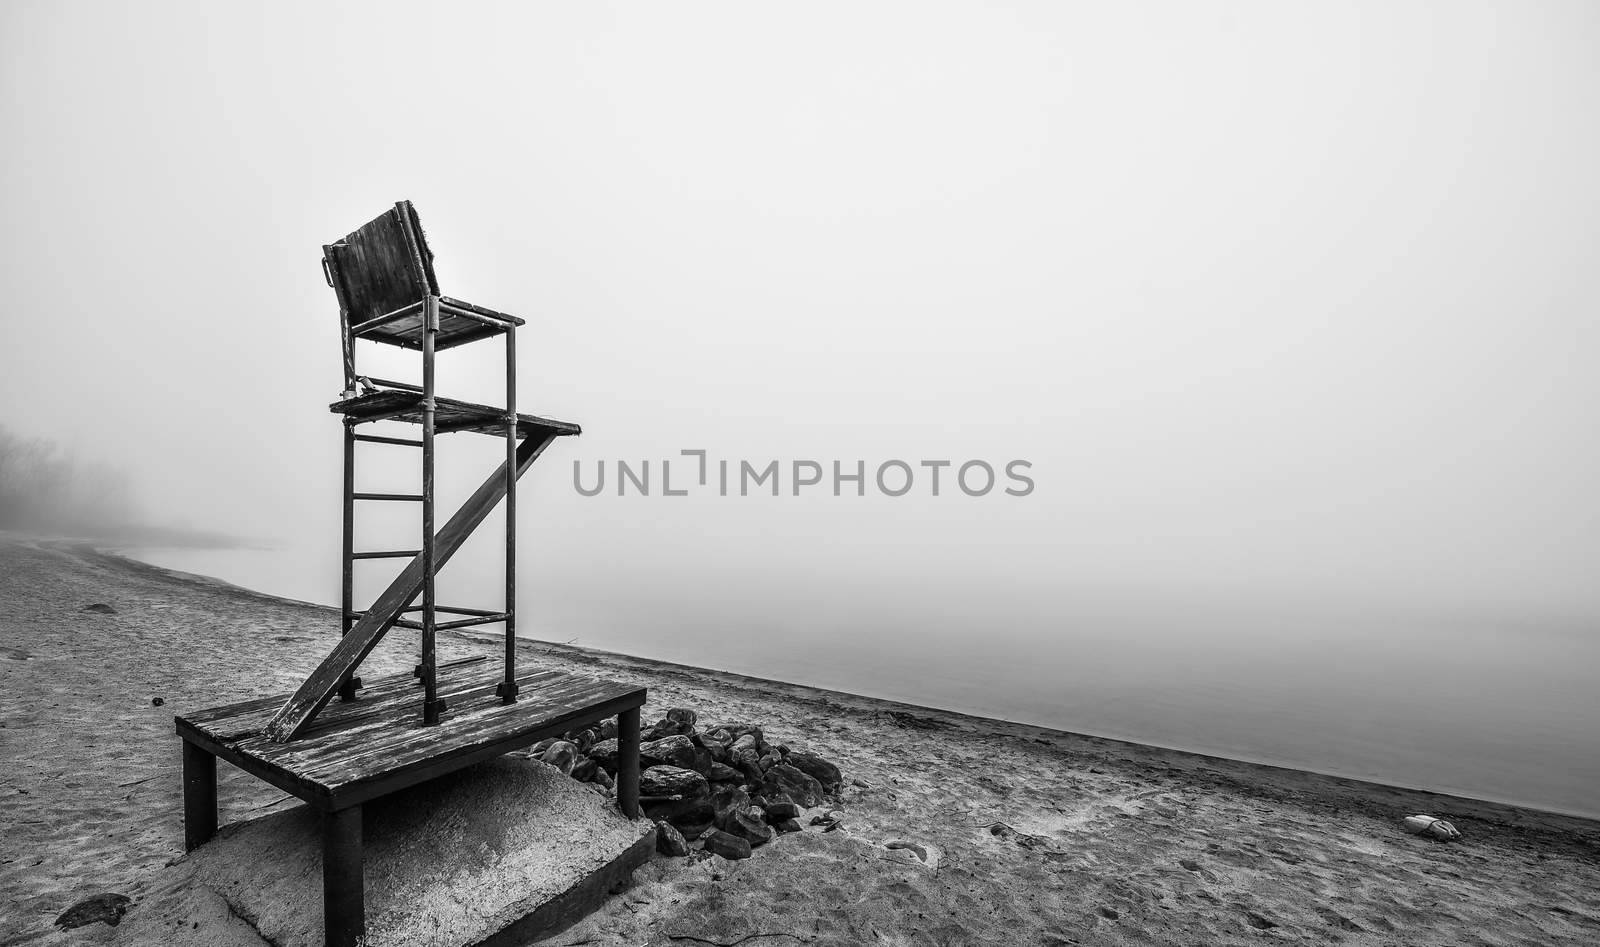 Black & white of lonely lifeguard seat stands empty in the fog on a November beach in Ontario Canada.